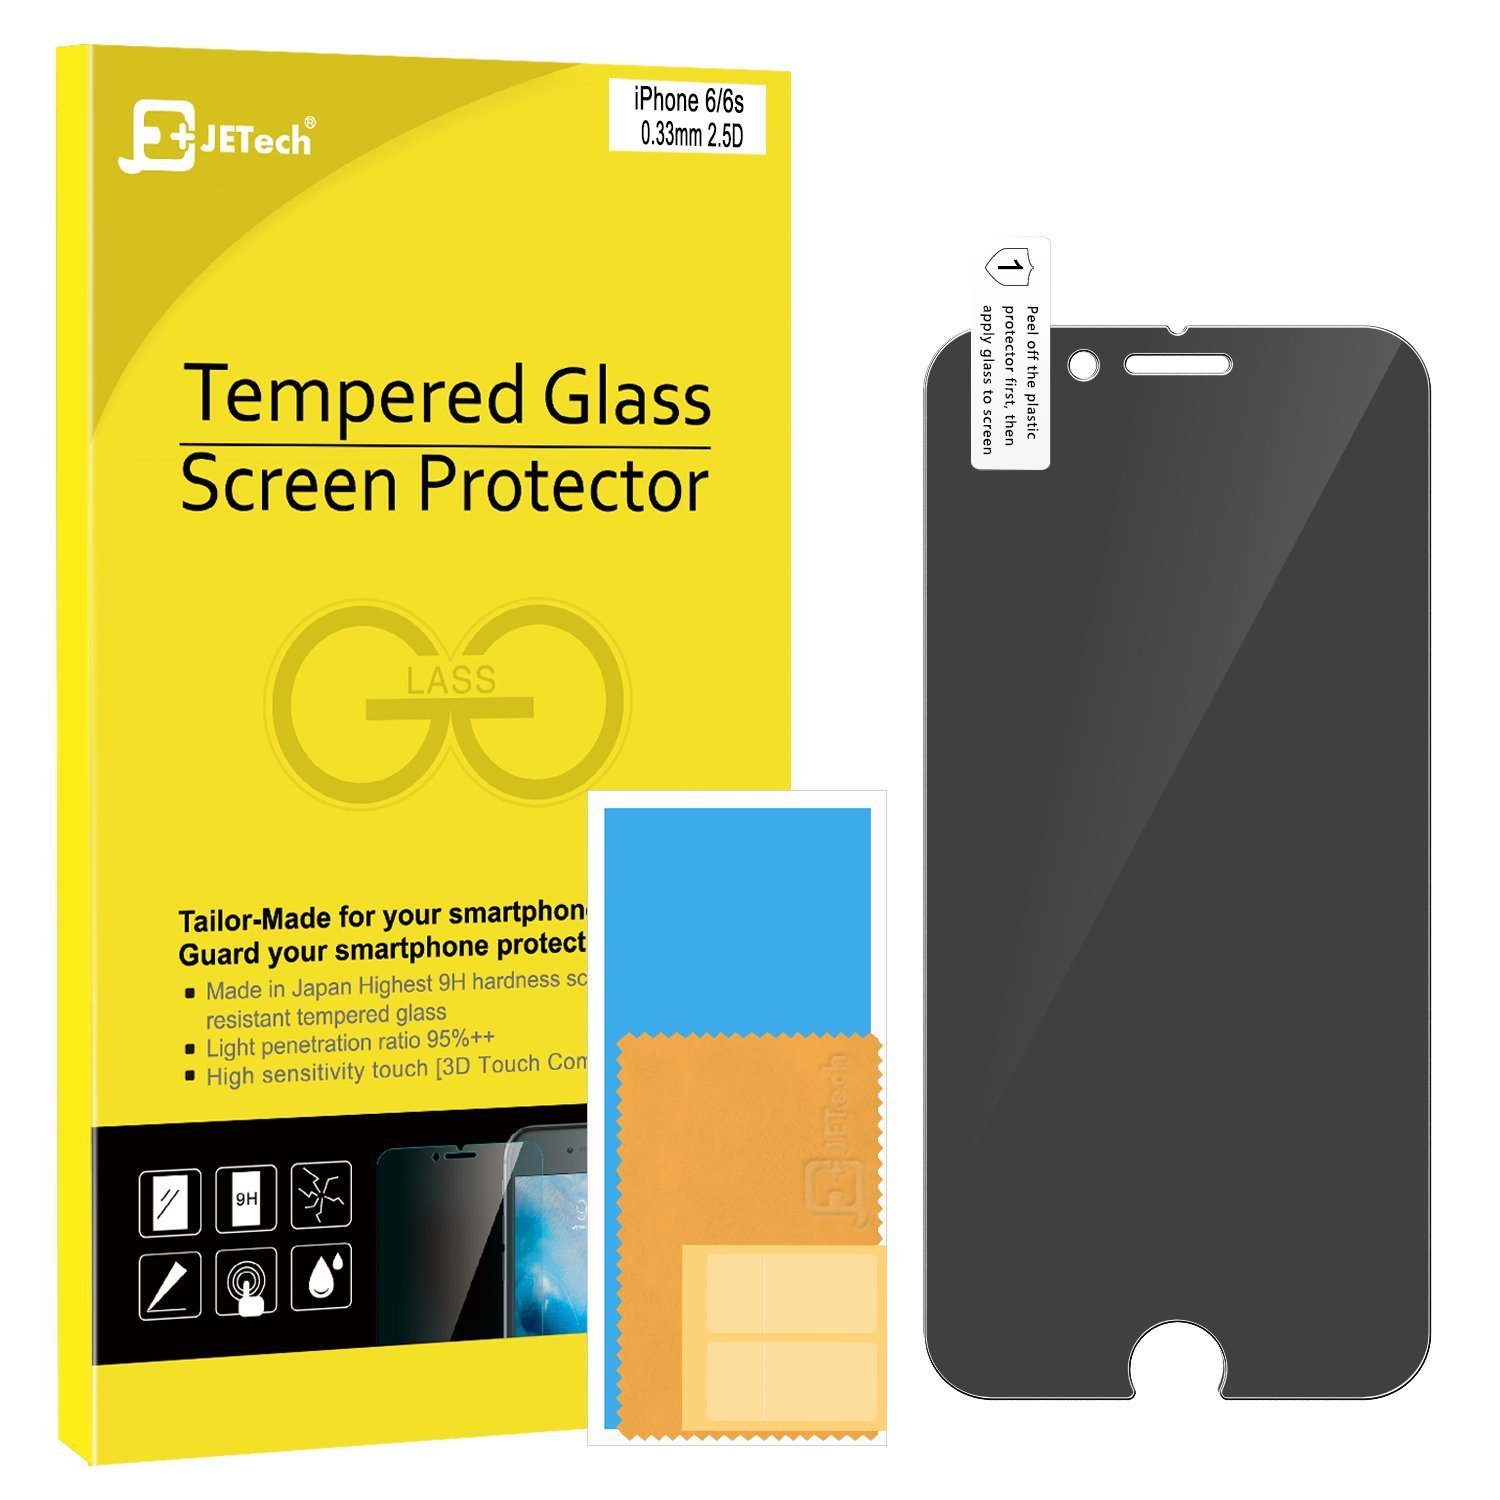 Multitouch Optimized self-Adhesive upscreen Spy Shield Clear Privacy Screen Protector for Canon PowerShot SX60 HS Privacy Protection 